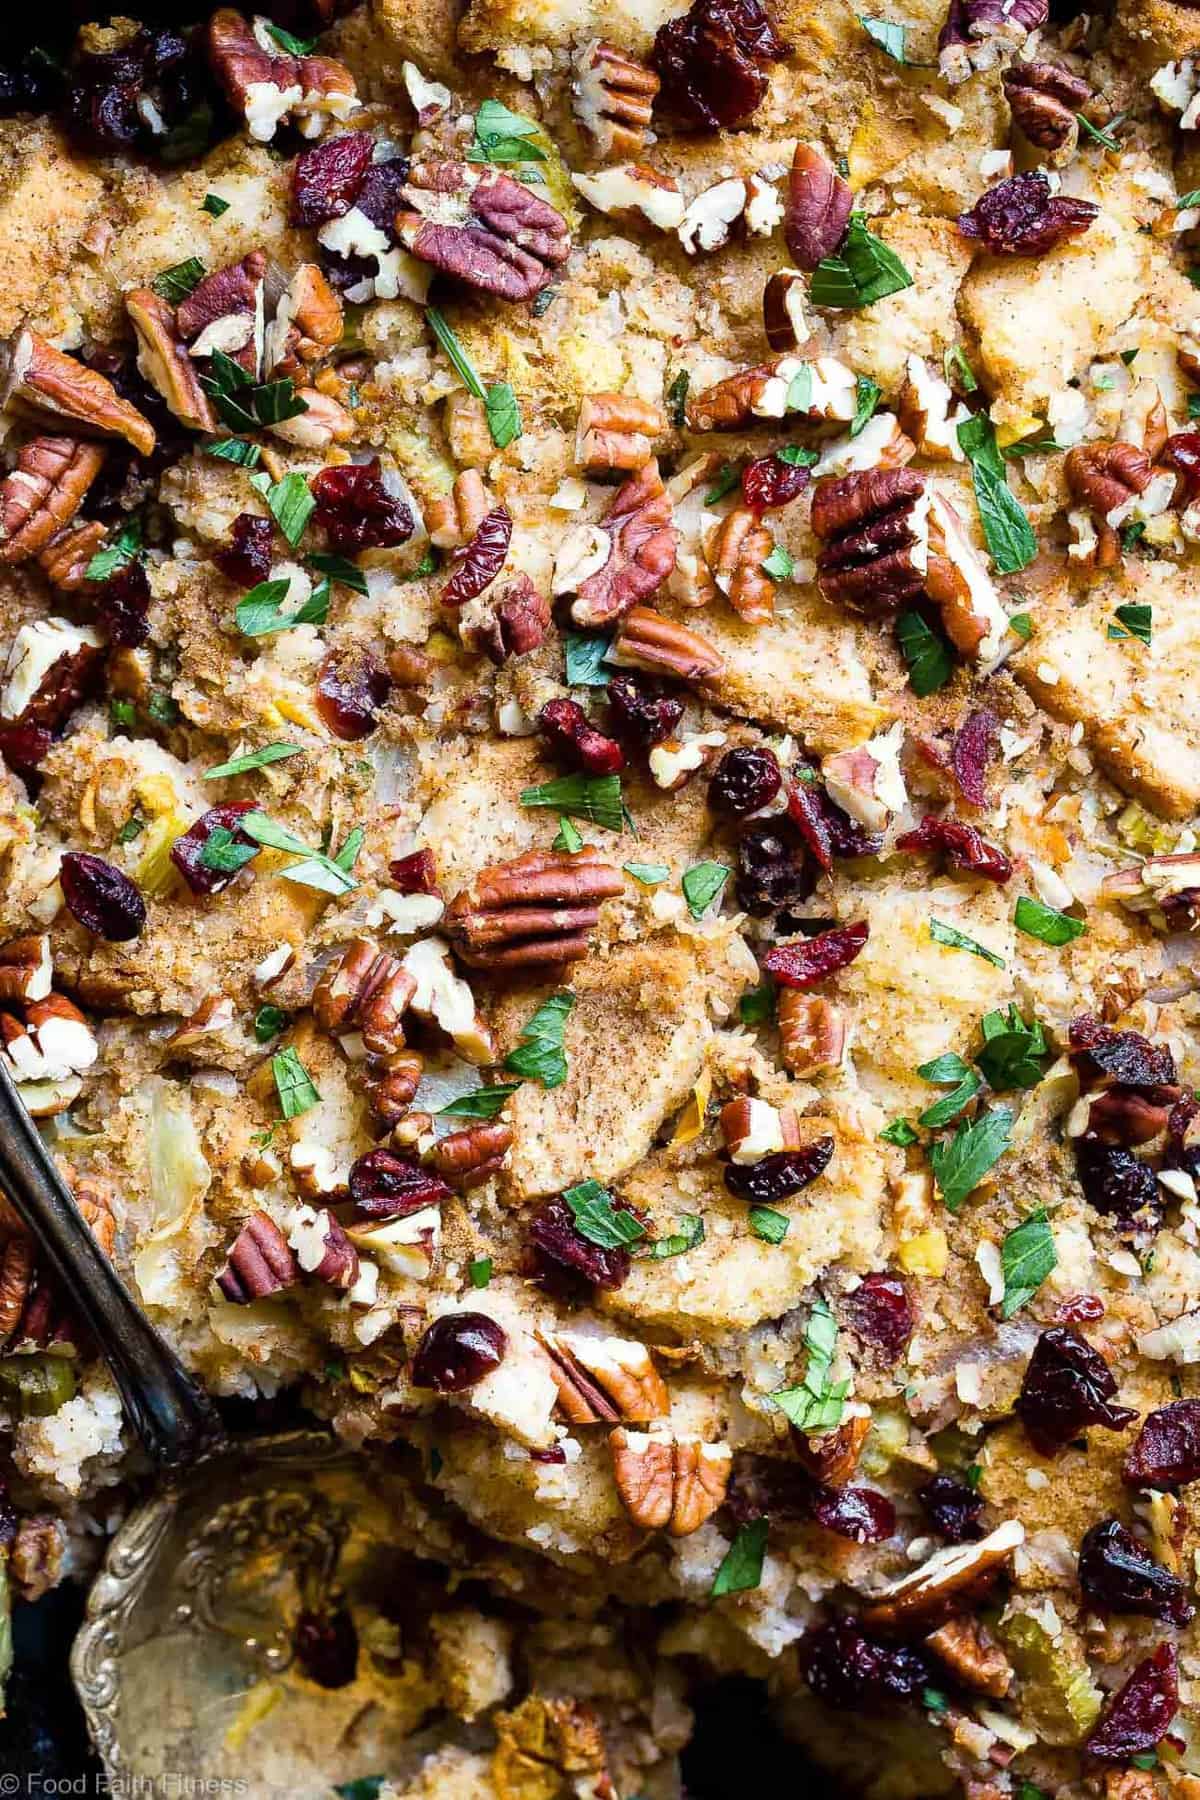 Harvest Gluten Free Vegan Stuffing - This moist Dairy Free Simple Vegan Stuffing Recipe is loaded with fall flavors like pears, oranges, cranberries and cozy cinnamon! Easy, gluten free and SO tasty! | #Foodfaitfitness | #Glutenfree #Vegan #Dairyfree #Healthy #Thanksgiving